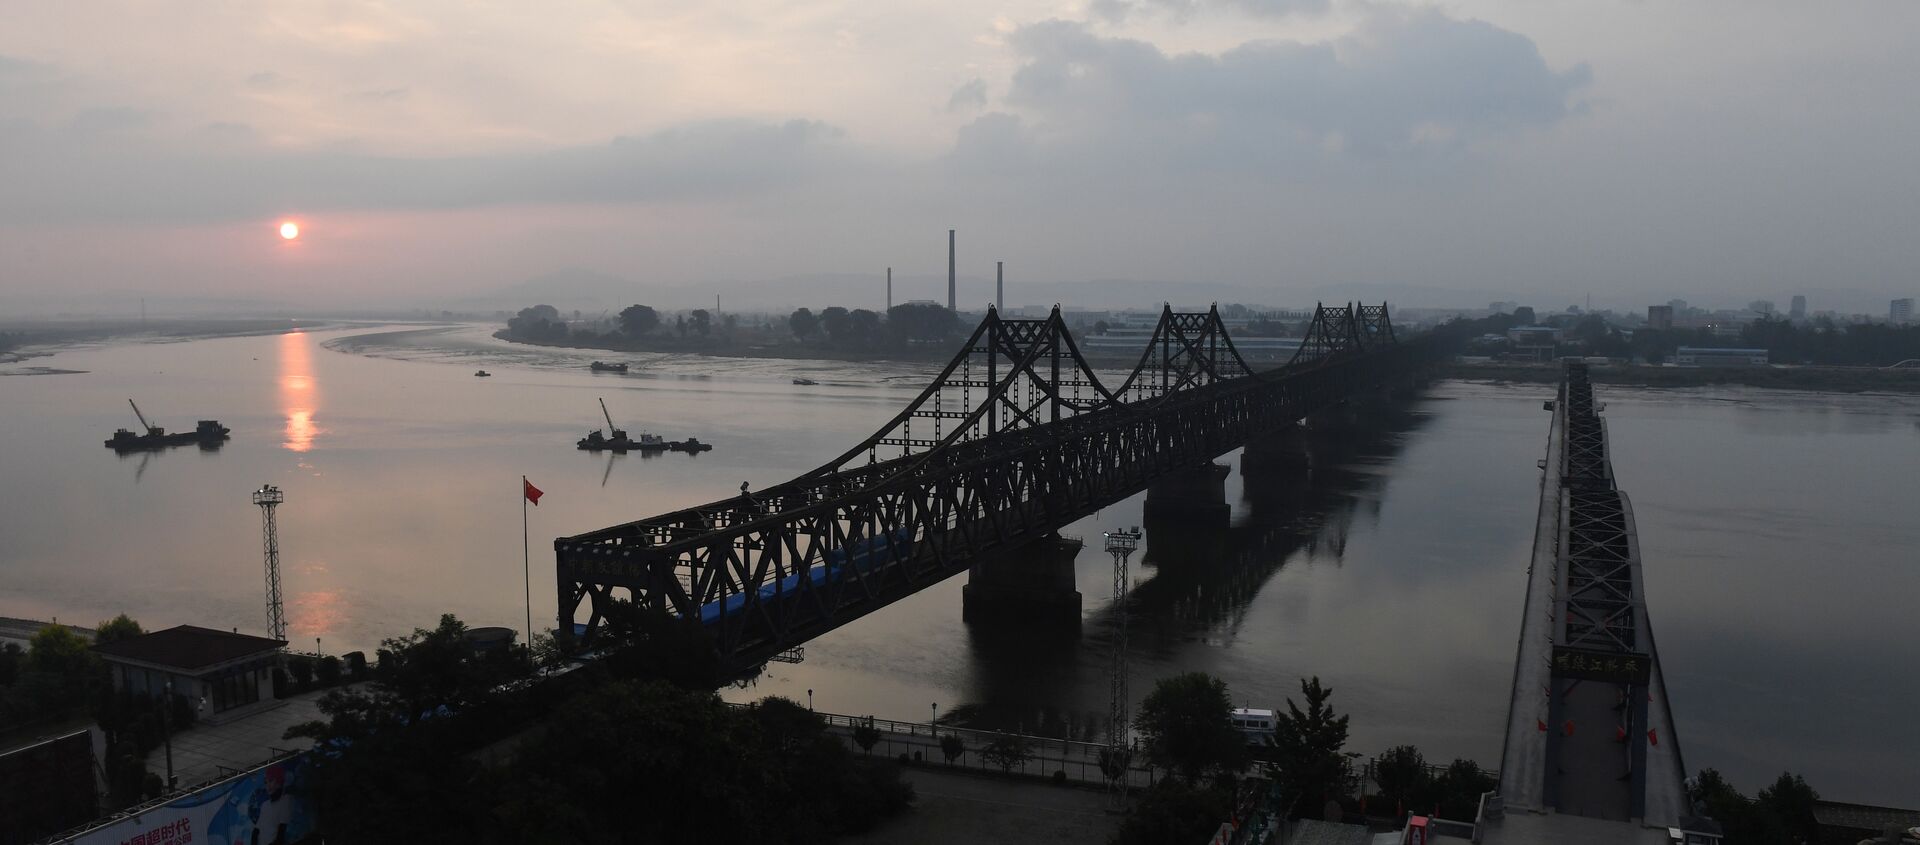 The Friendship Bridge (L) and Broken Bridge (R), which lead to North Korea, seen from Dandong - 俄羅斯衛星通訊社, 1920, 24.03.2021